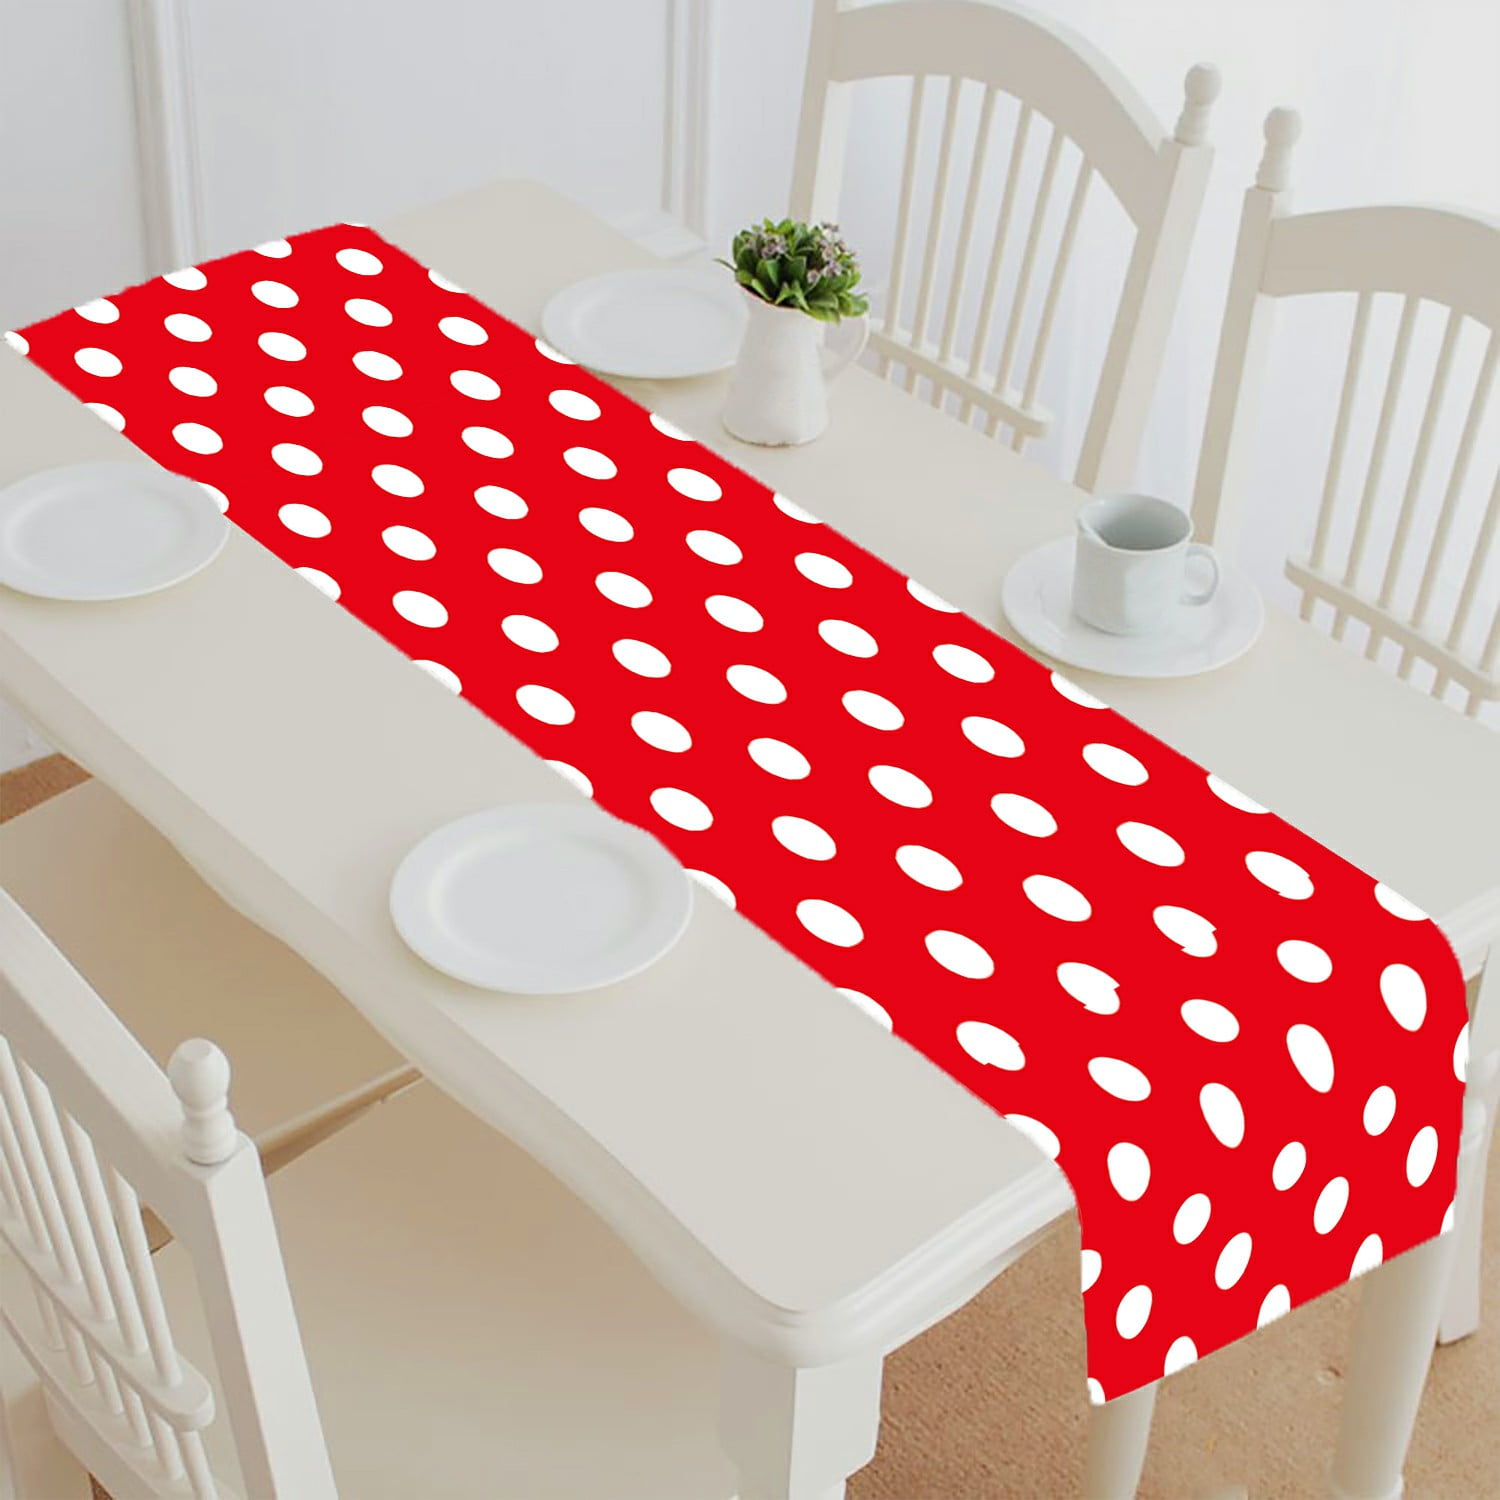 ABPHQTO Red Polka Dot Table Runner Placemat Tablecloth For Home Decor ...